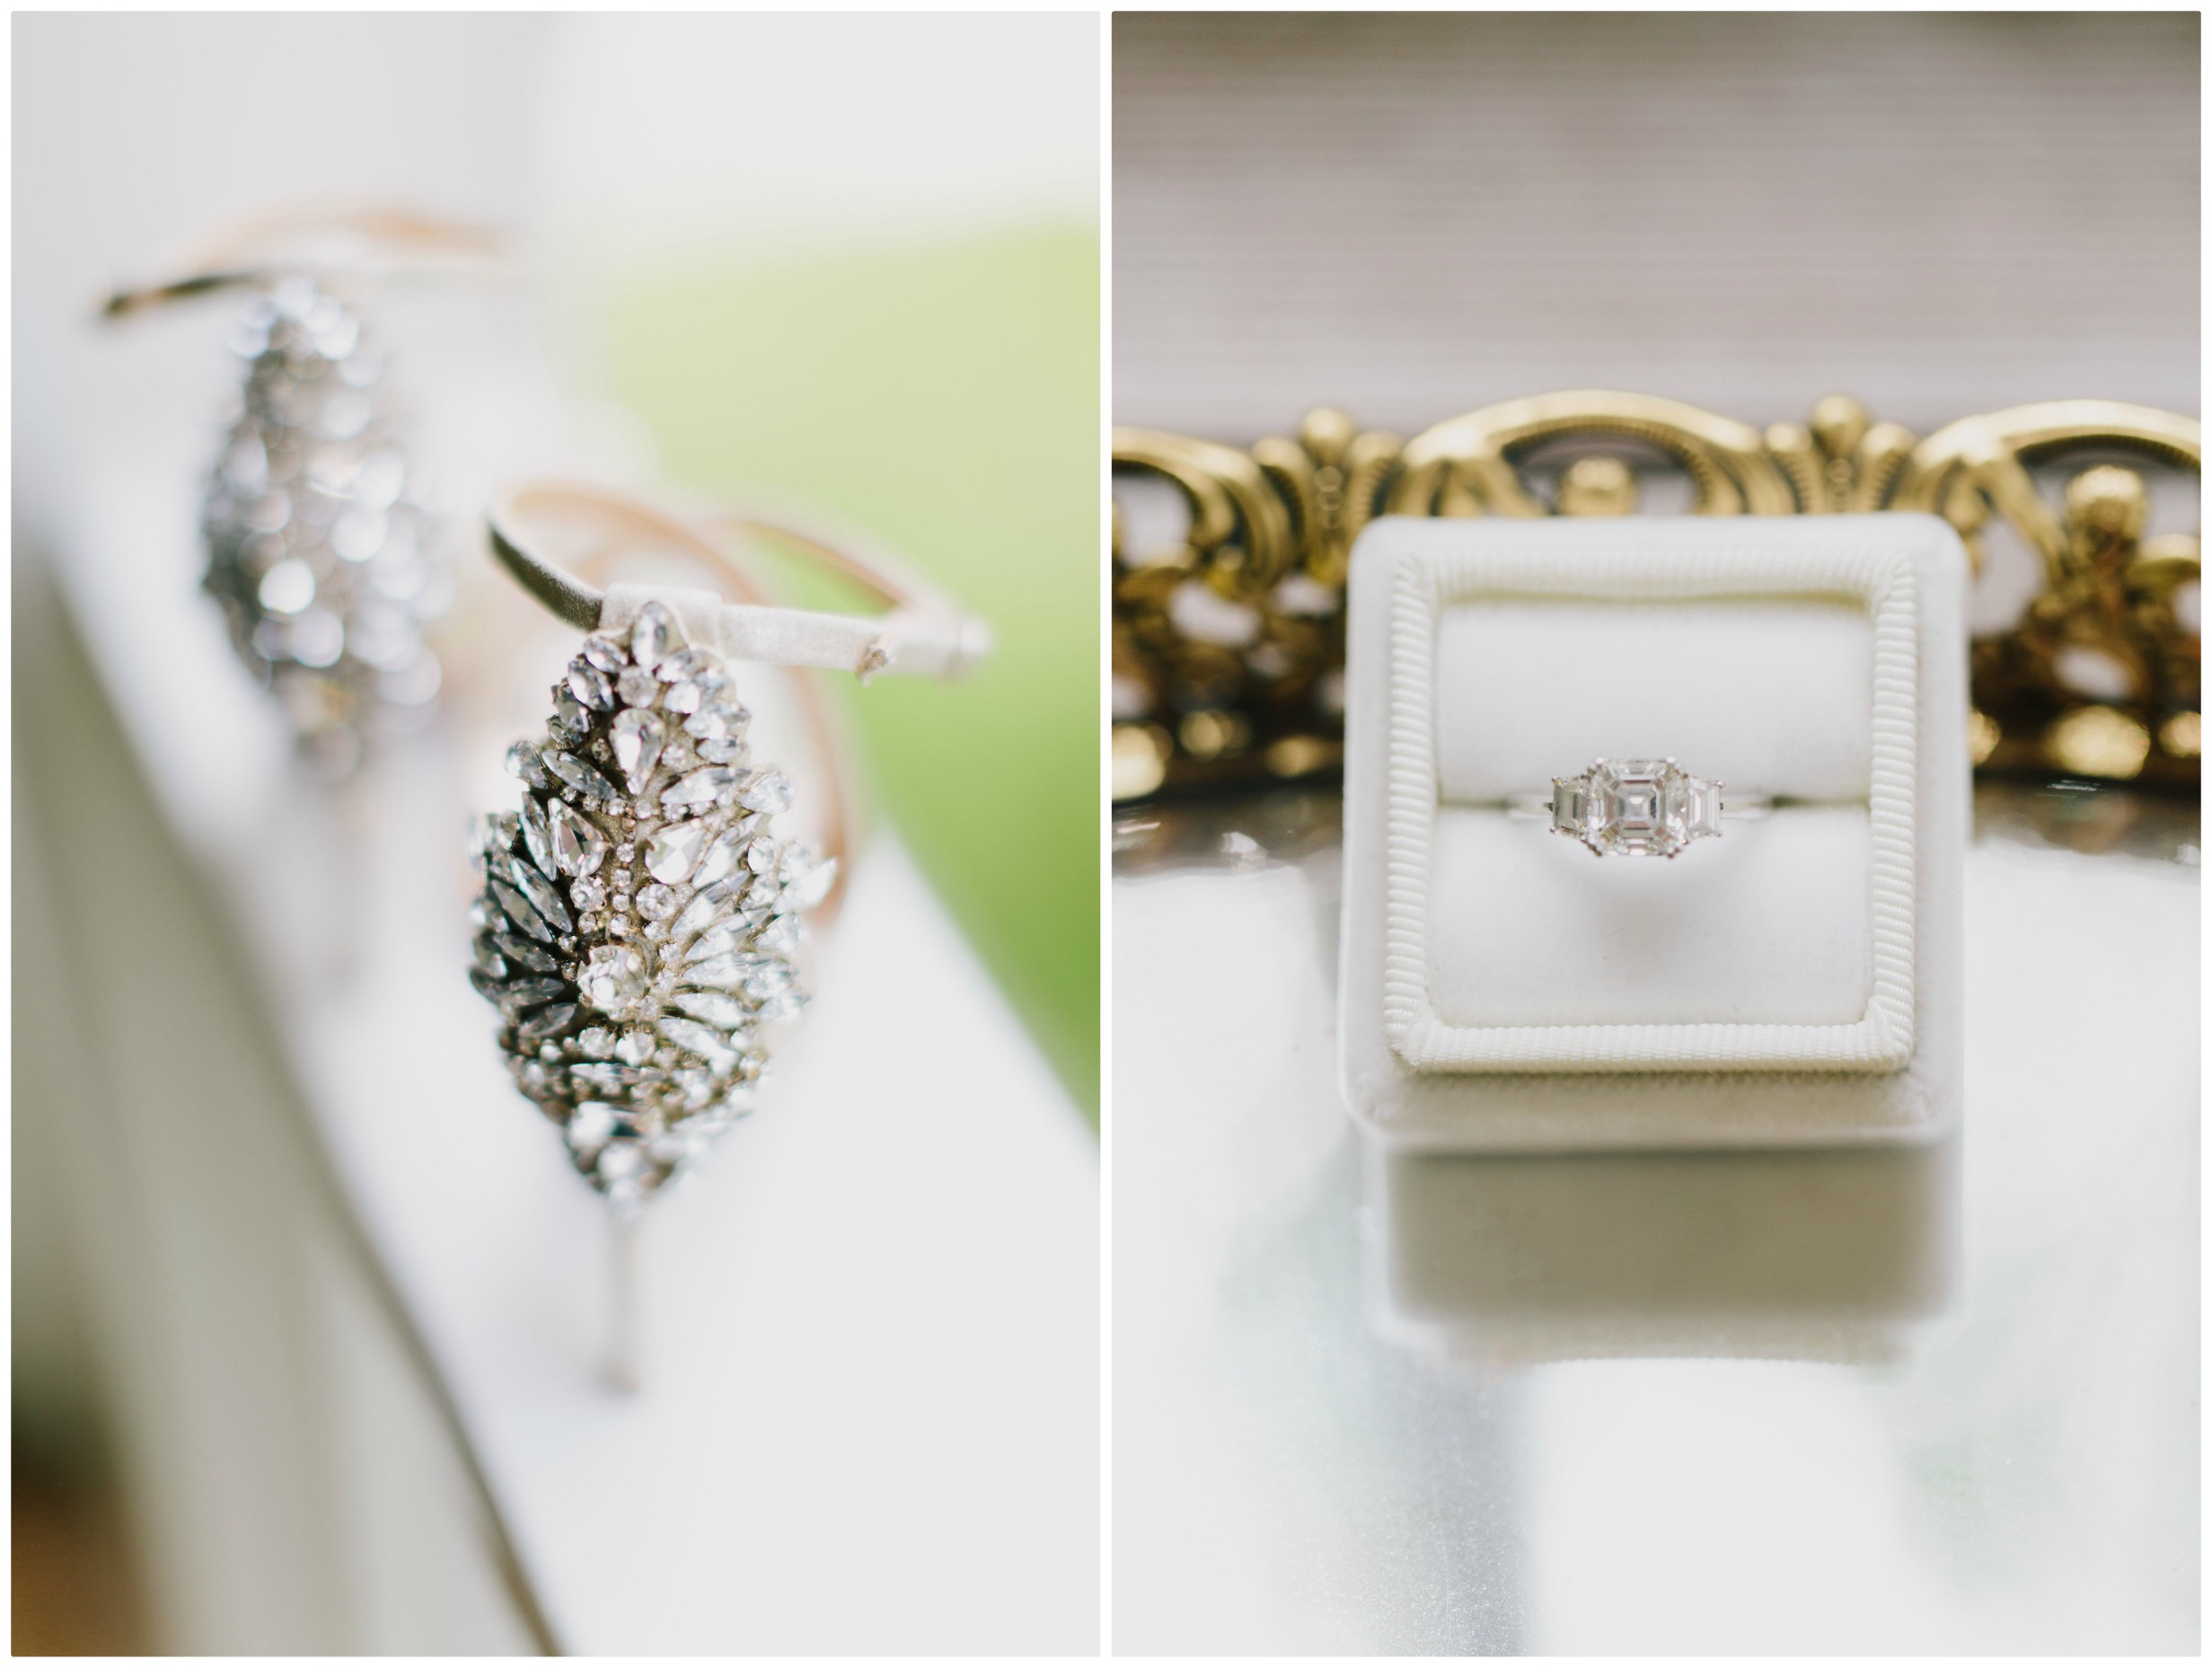 Ring Details Wedding | The Day's Design | Katie Grace Photography